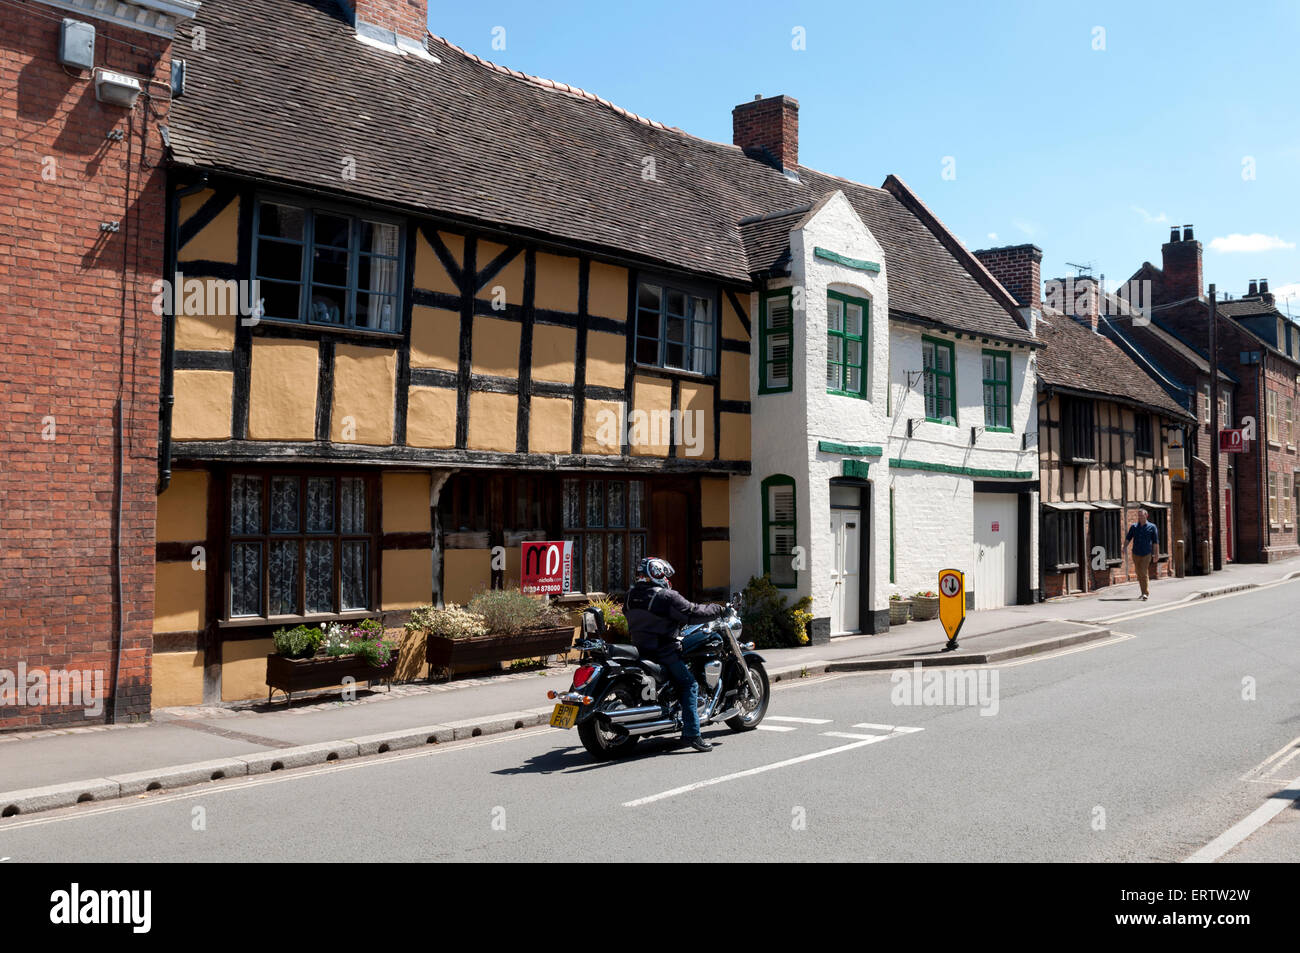 A motorcycle in High Street, Kinver, Staffordshire, England, UK Stock Photo